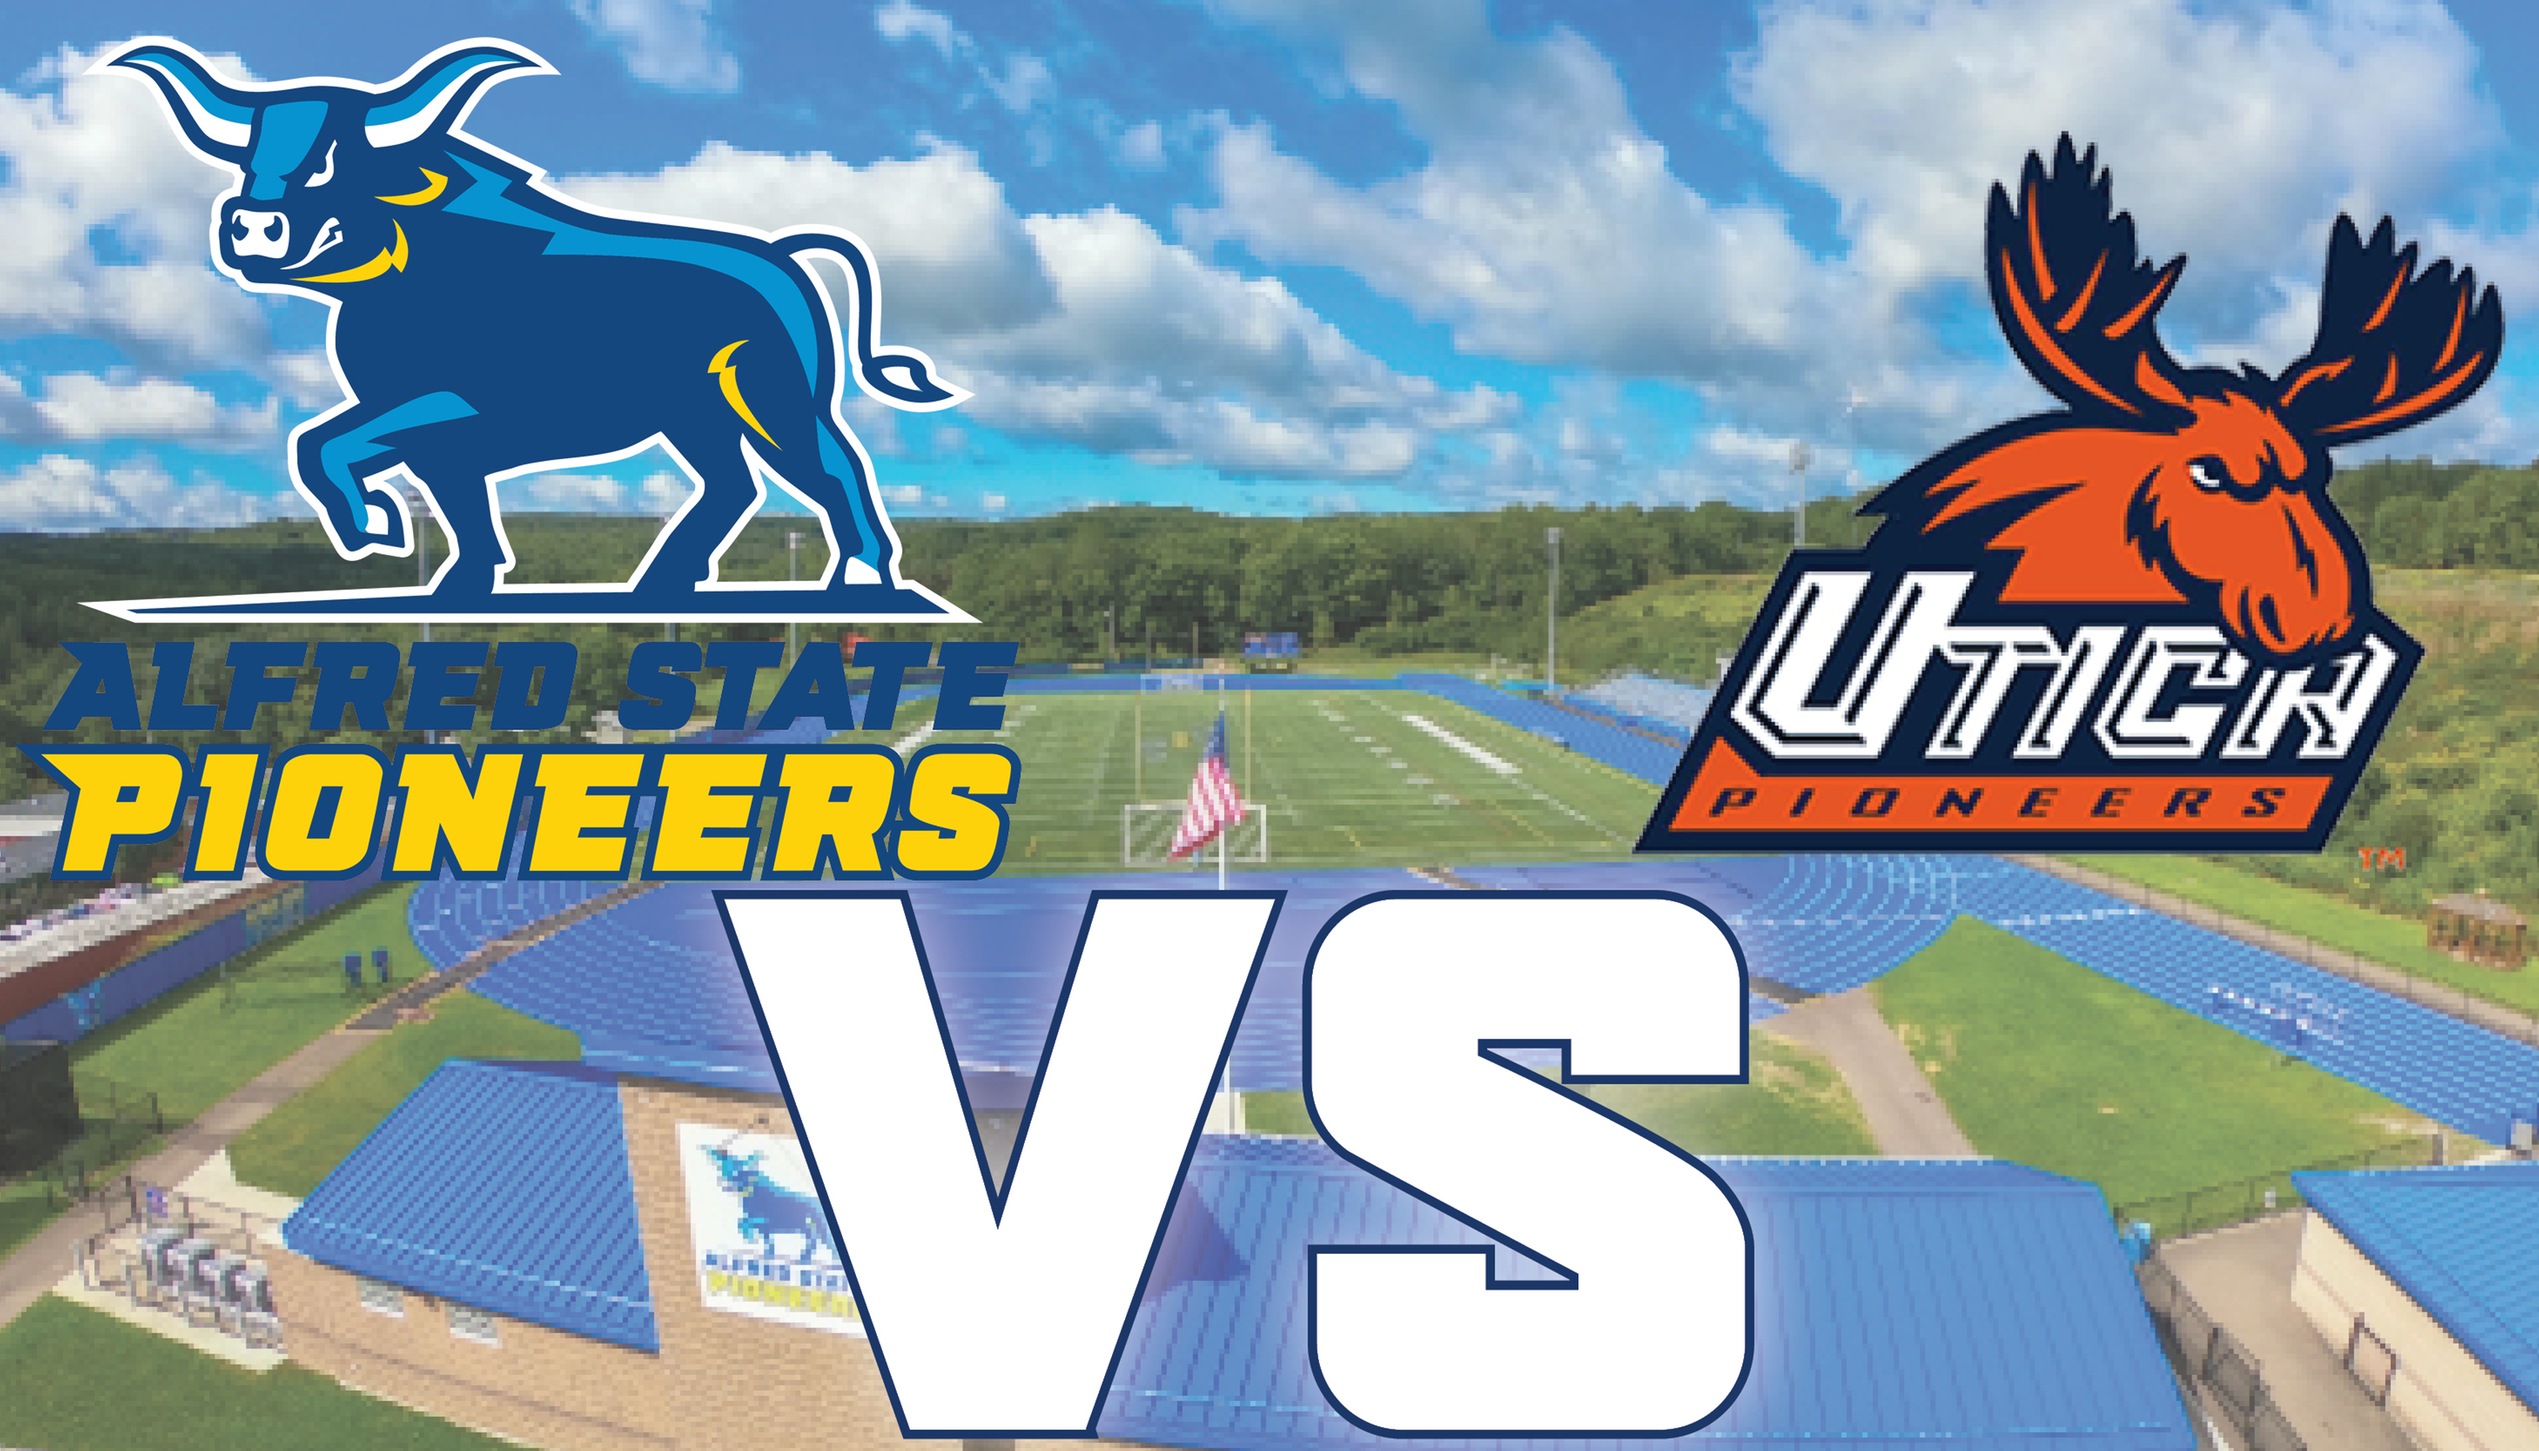 Logos of Alfred State and Utica with a picture of Pioneer Stadium in the background.